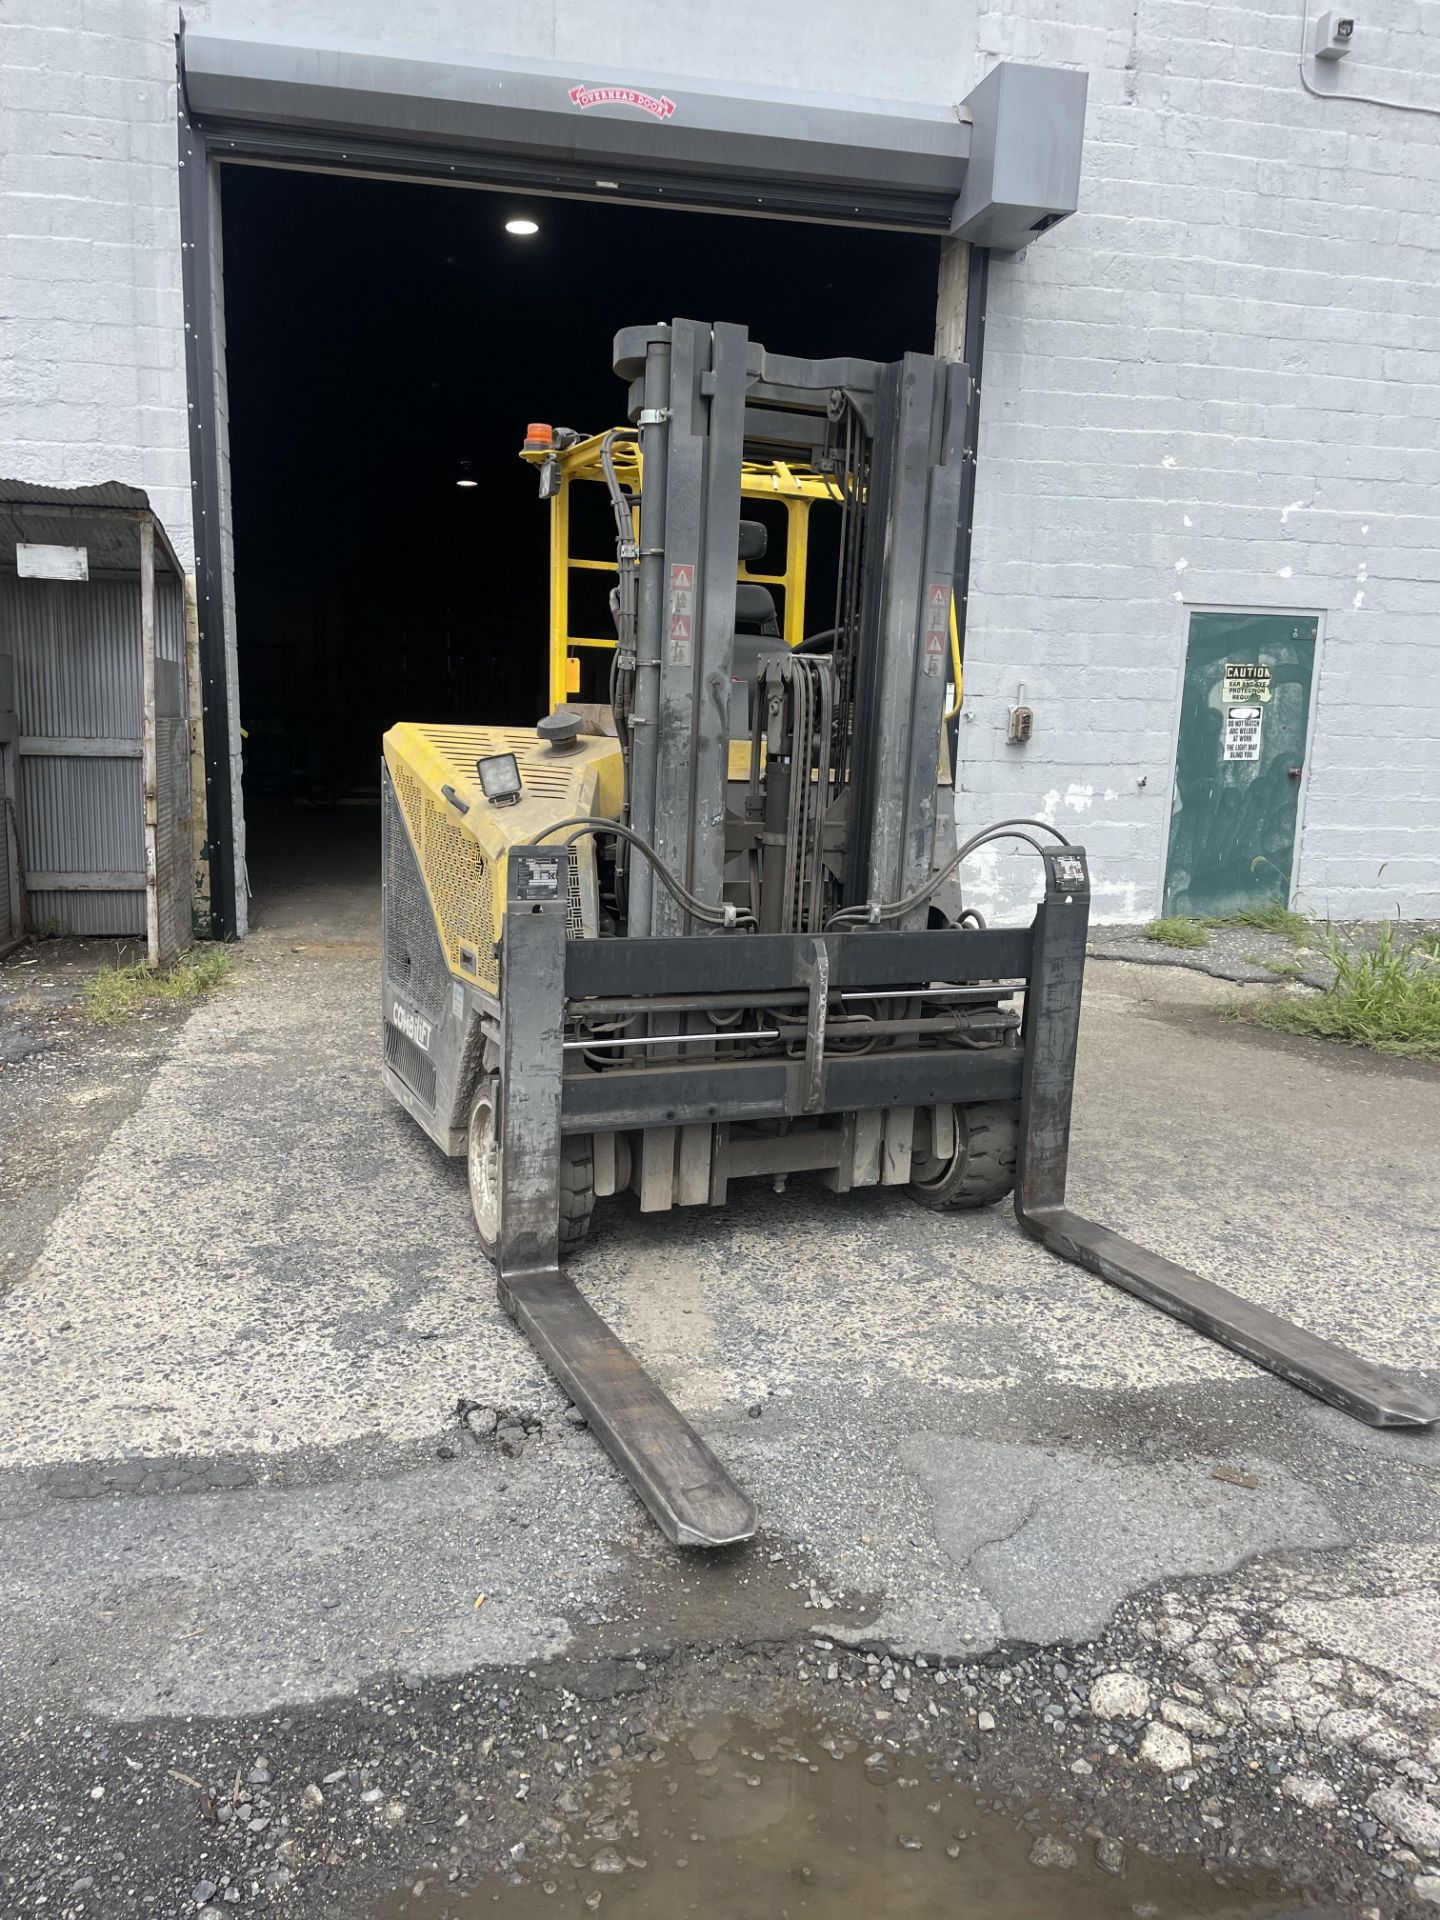 2019 Combilift CB9000 Multi Directional Forklift, Cap: 9,000 lbs w/ Kooi Reach Forks: 48" to 81" - Image 5 of 15